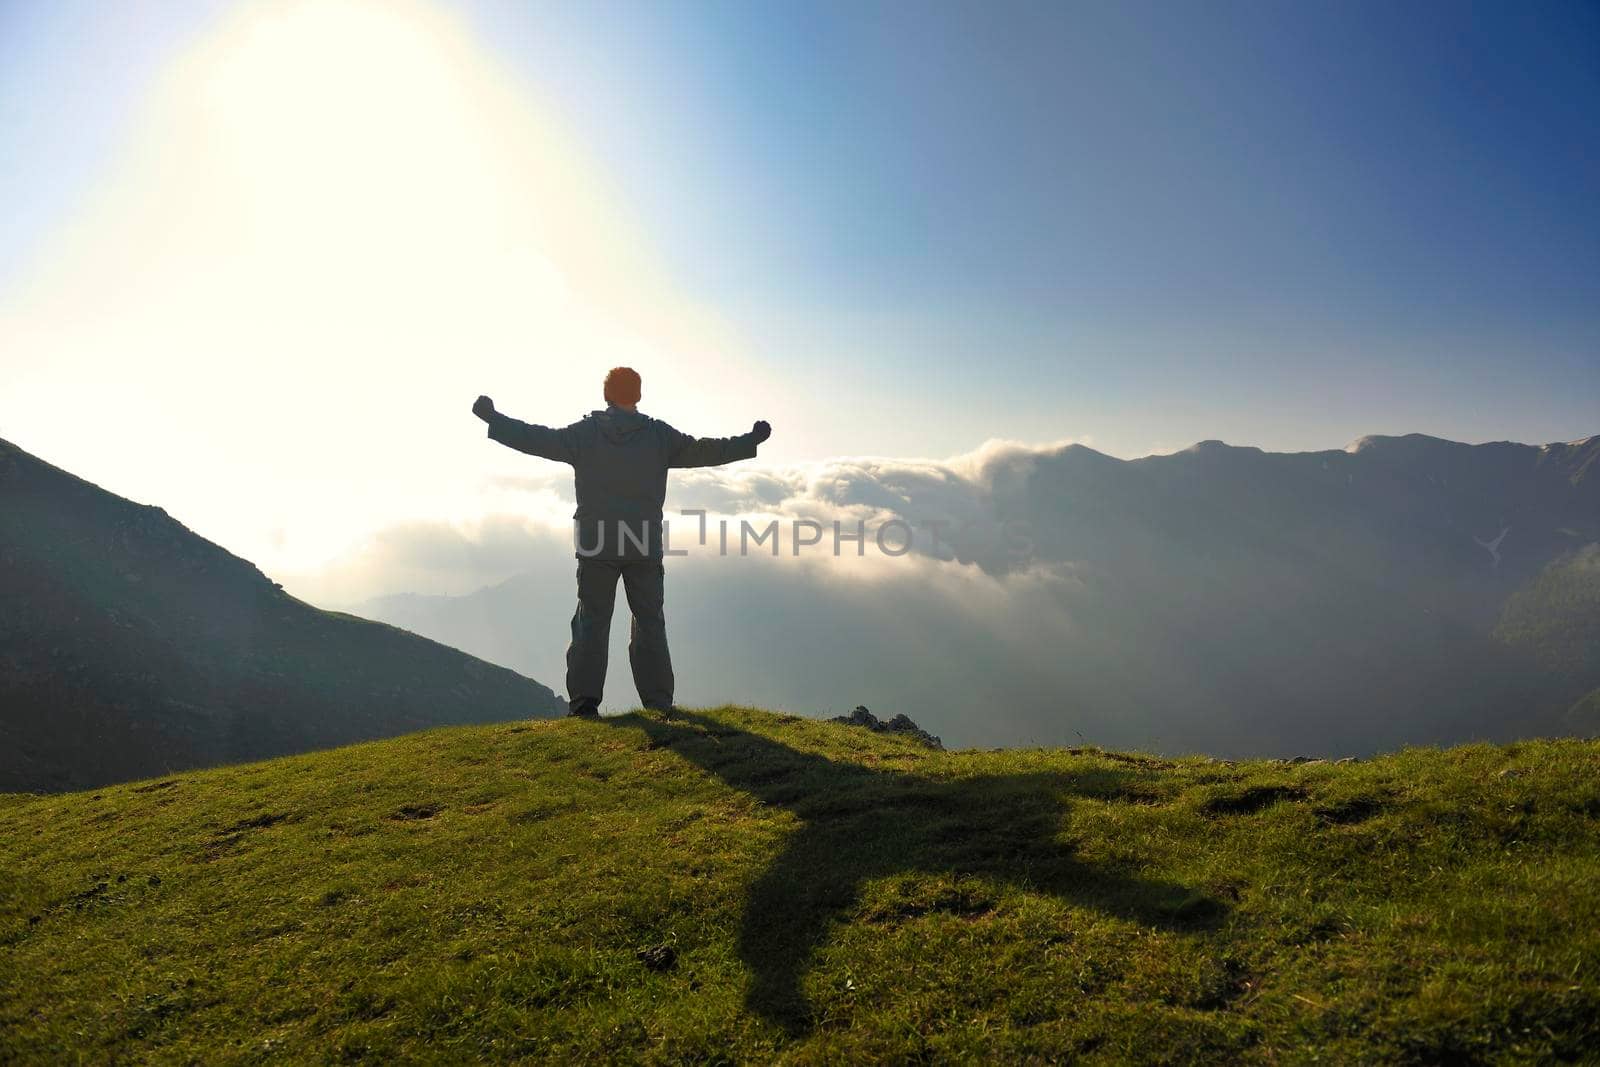 healthy young man practice yoga in height mountain at early morning and sunrise